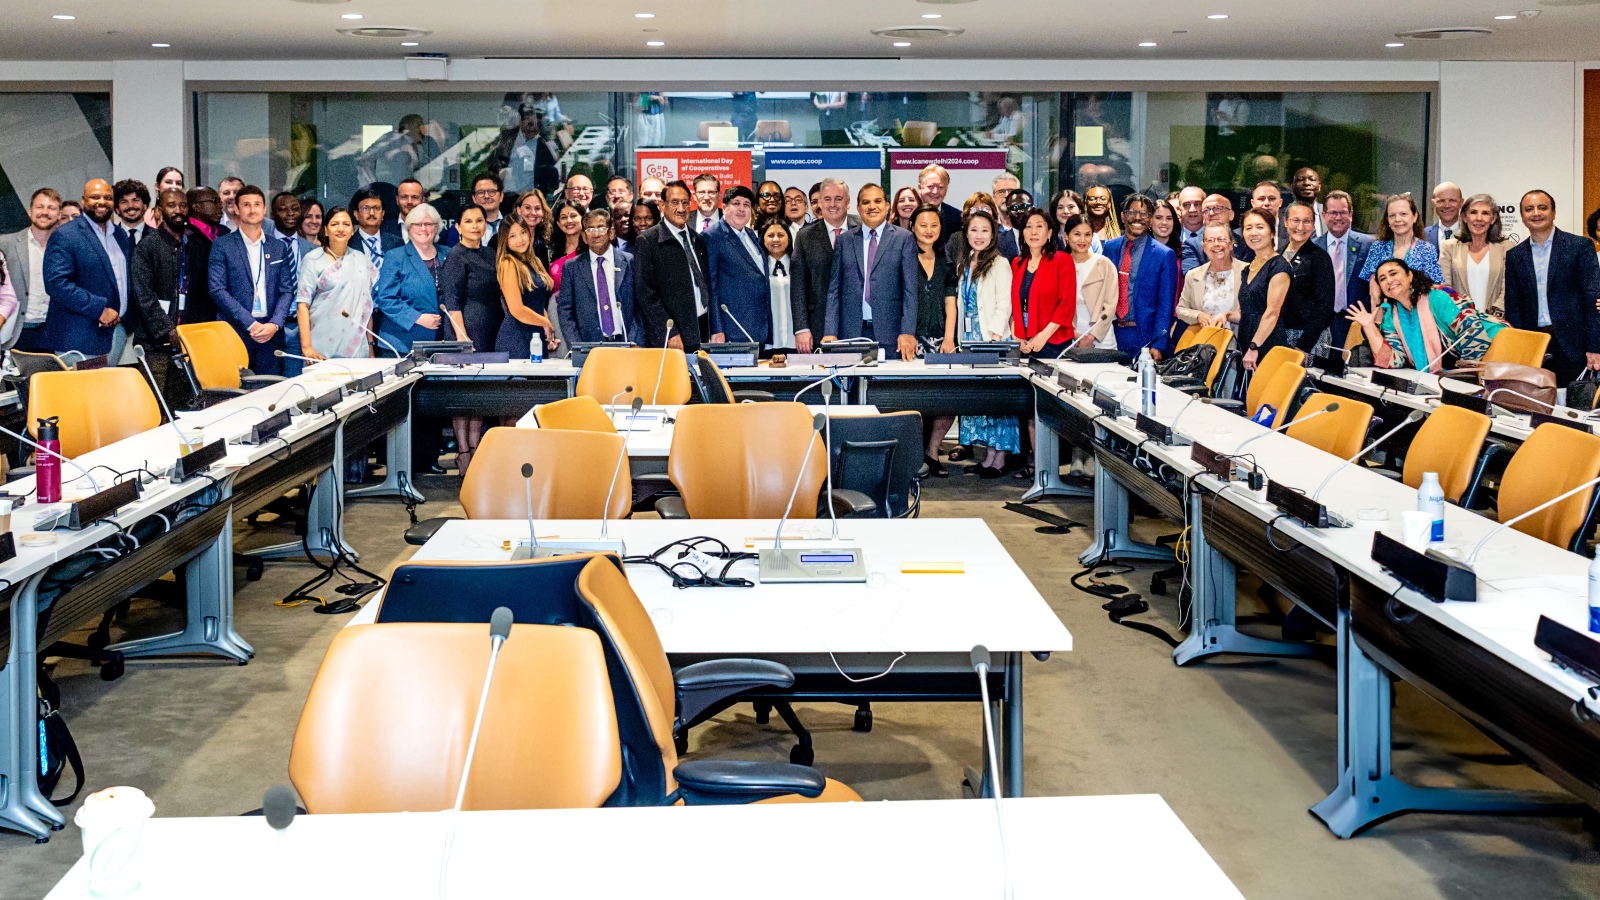 UN Hosted A Soft Launch Event For The 2025 International Year Of Cooperatives.